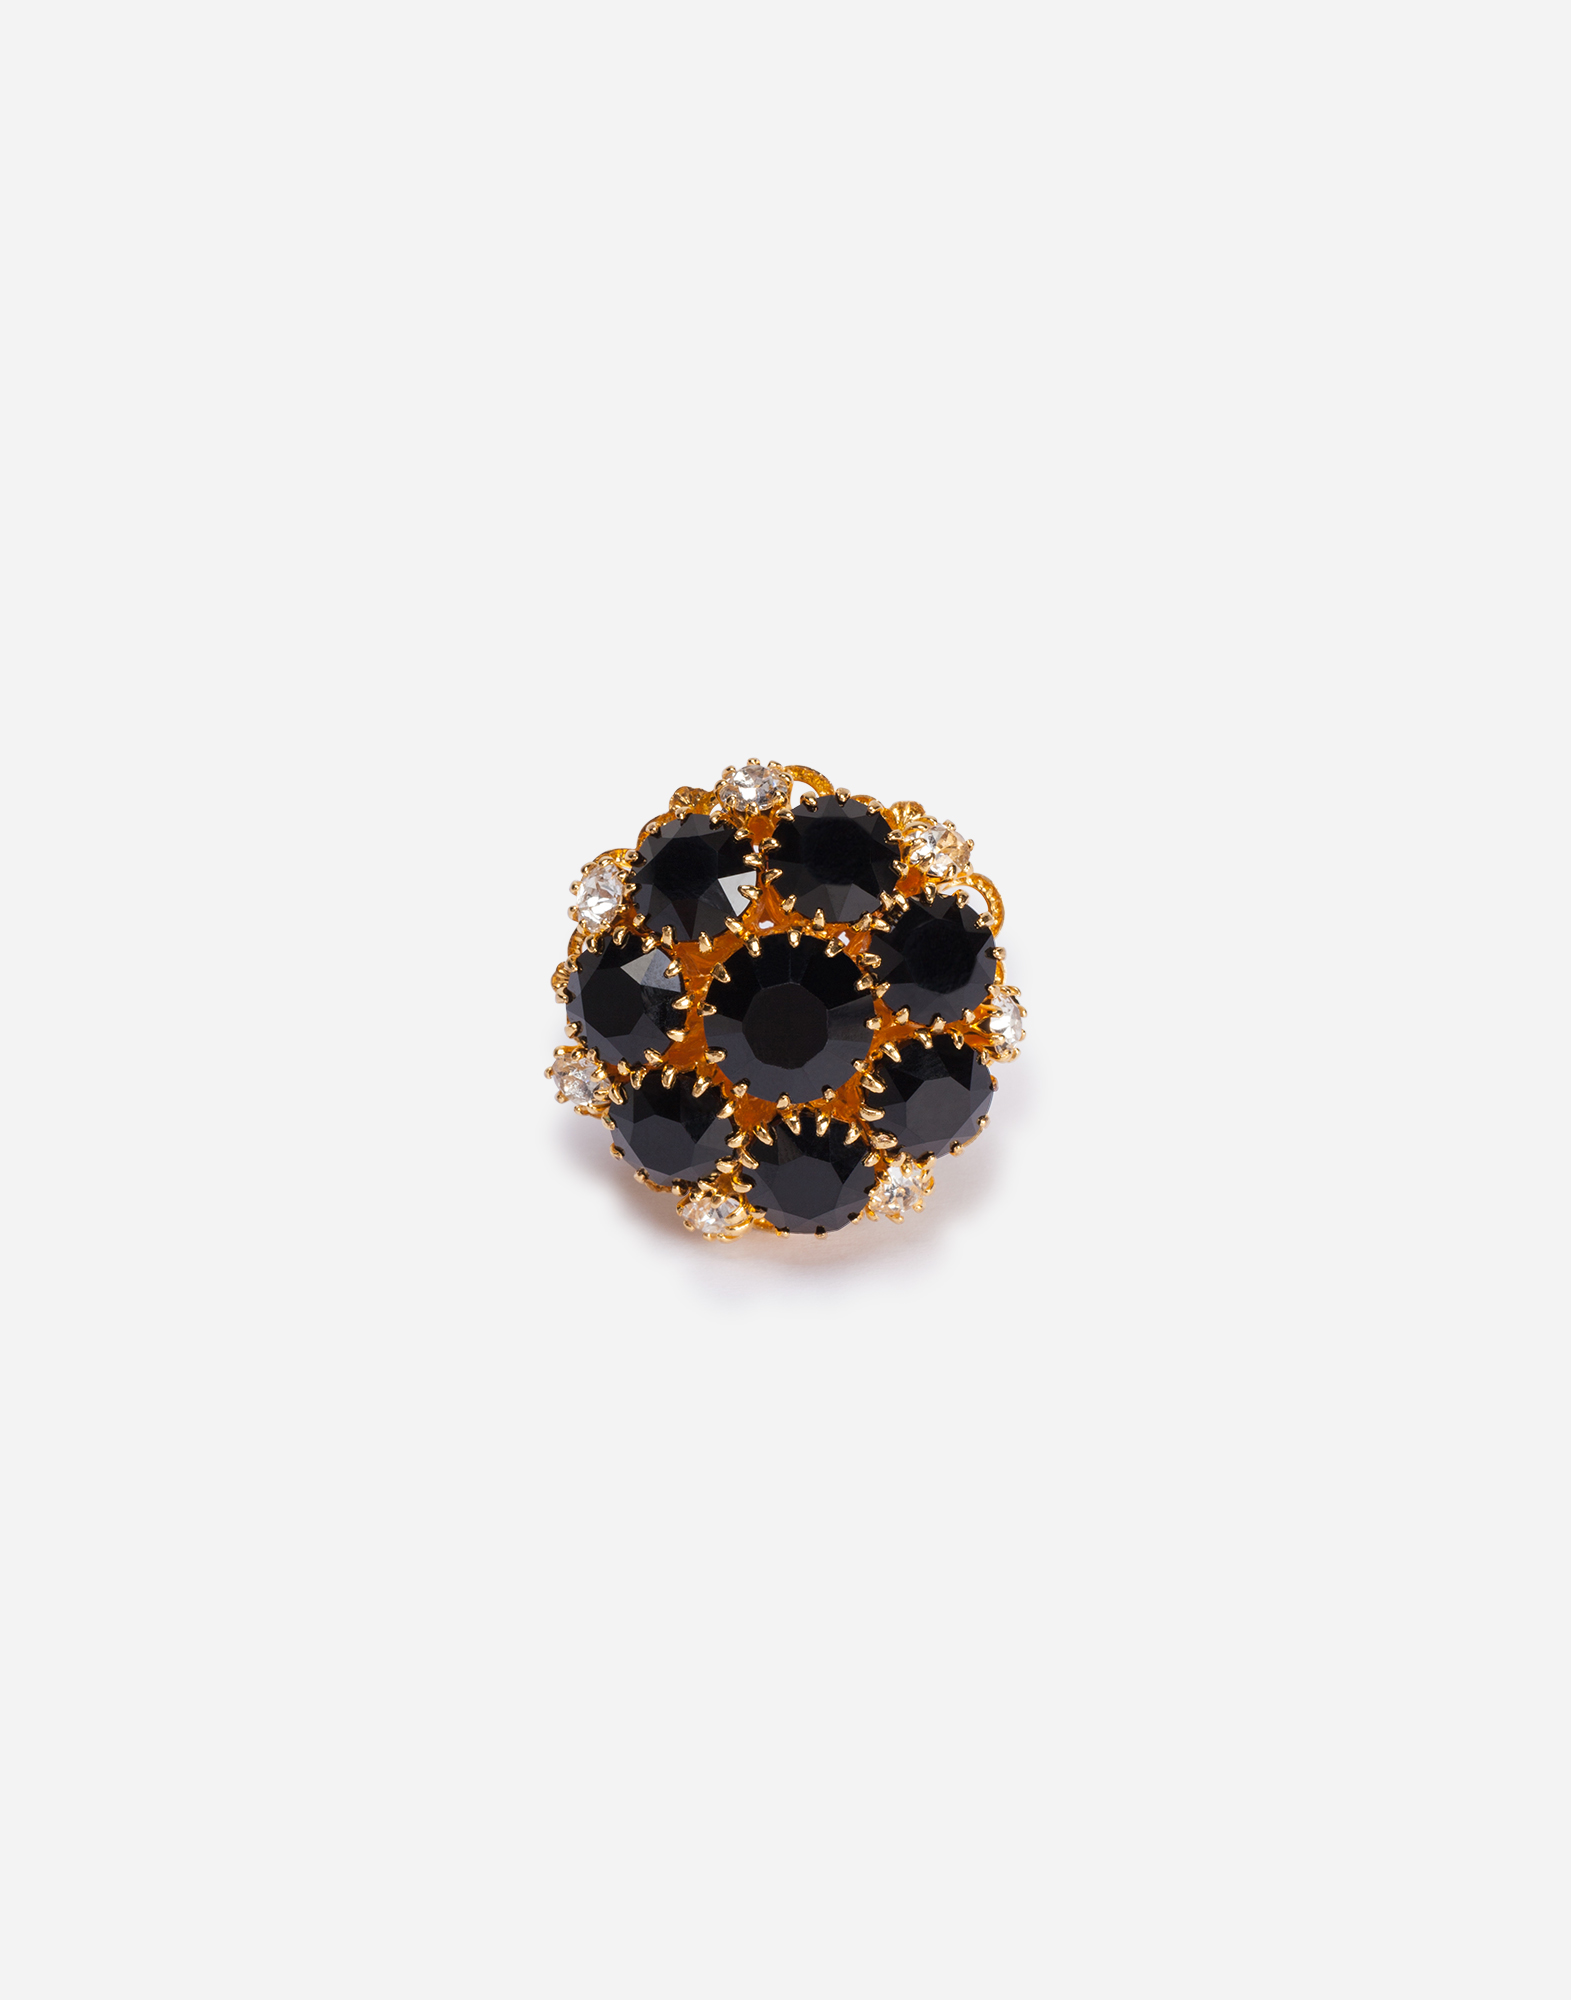 Ring with rhinestone decoration in Black/Gold